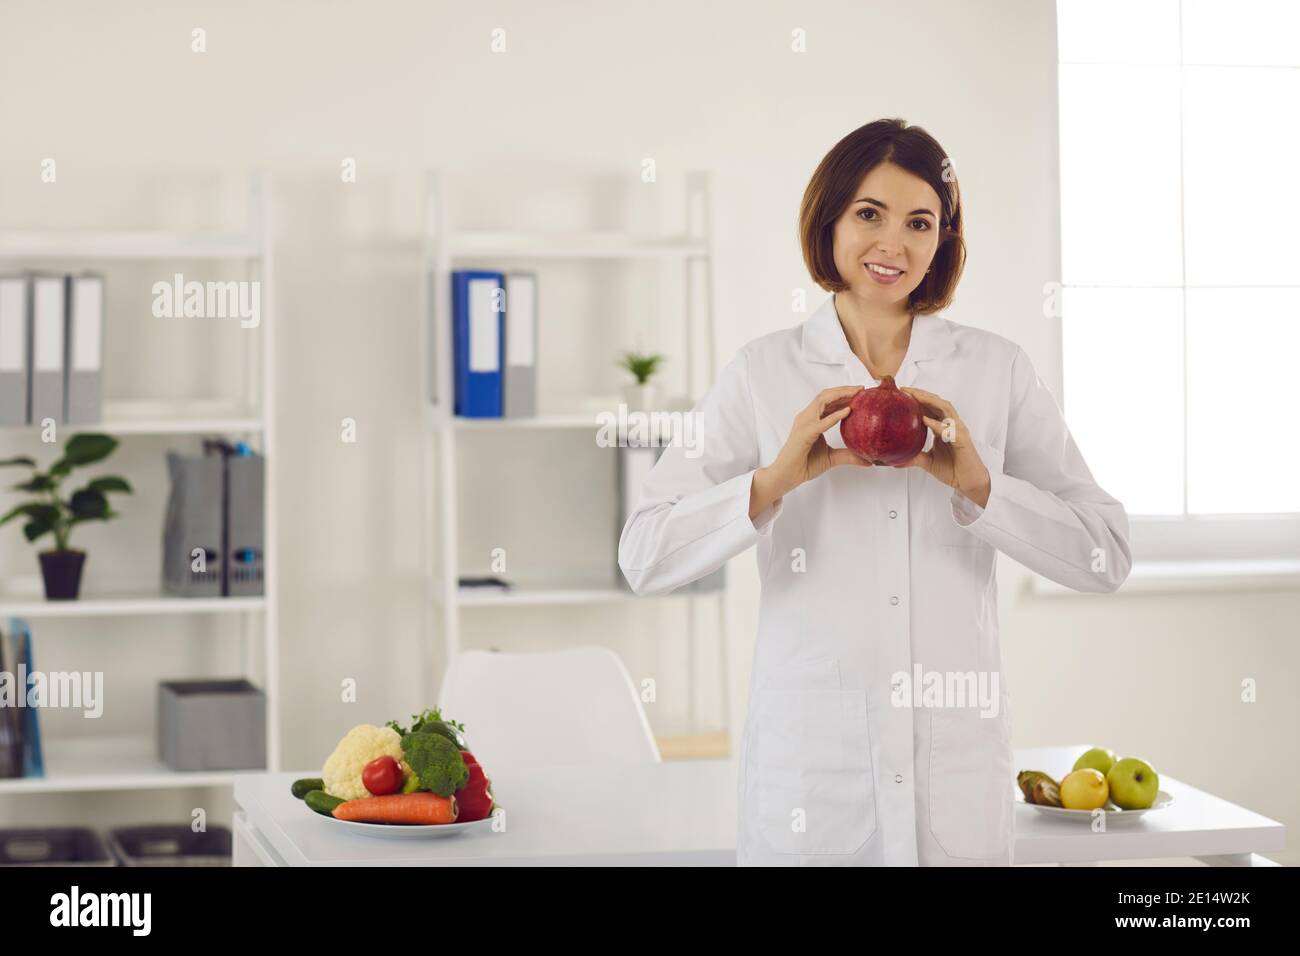 Portrait of a female nutritionist holding a pomegranate in her hands while standing in her office. Stock Photo